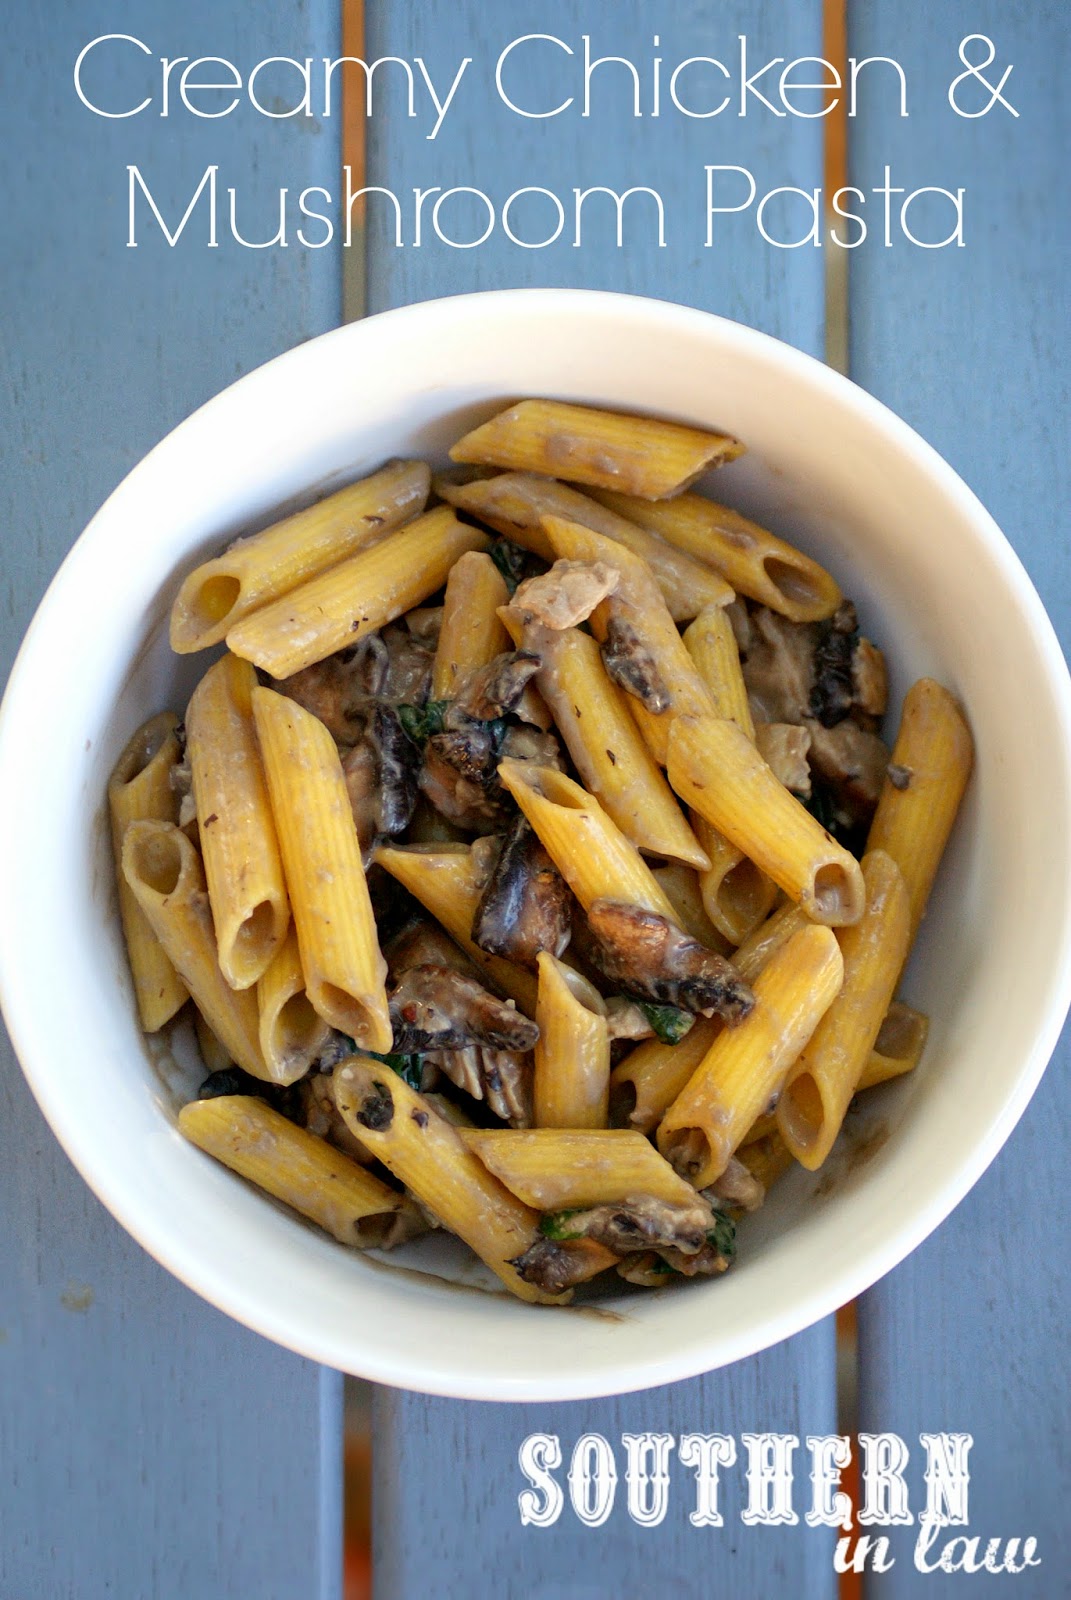 Low Fat Creamy Chicken and Mushroom Pasta Recipe - healthy, gluten free, clean eating friendly